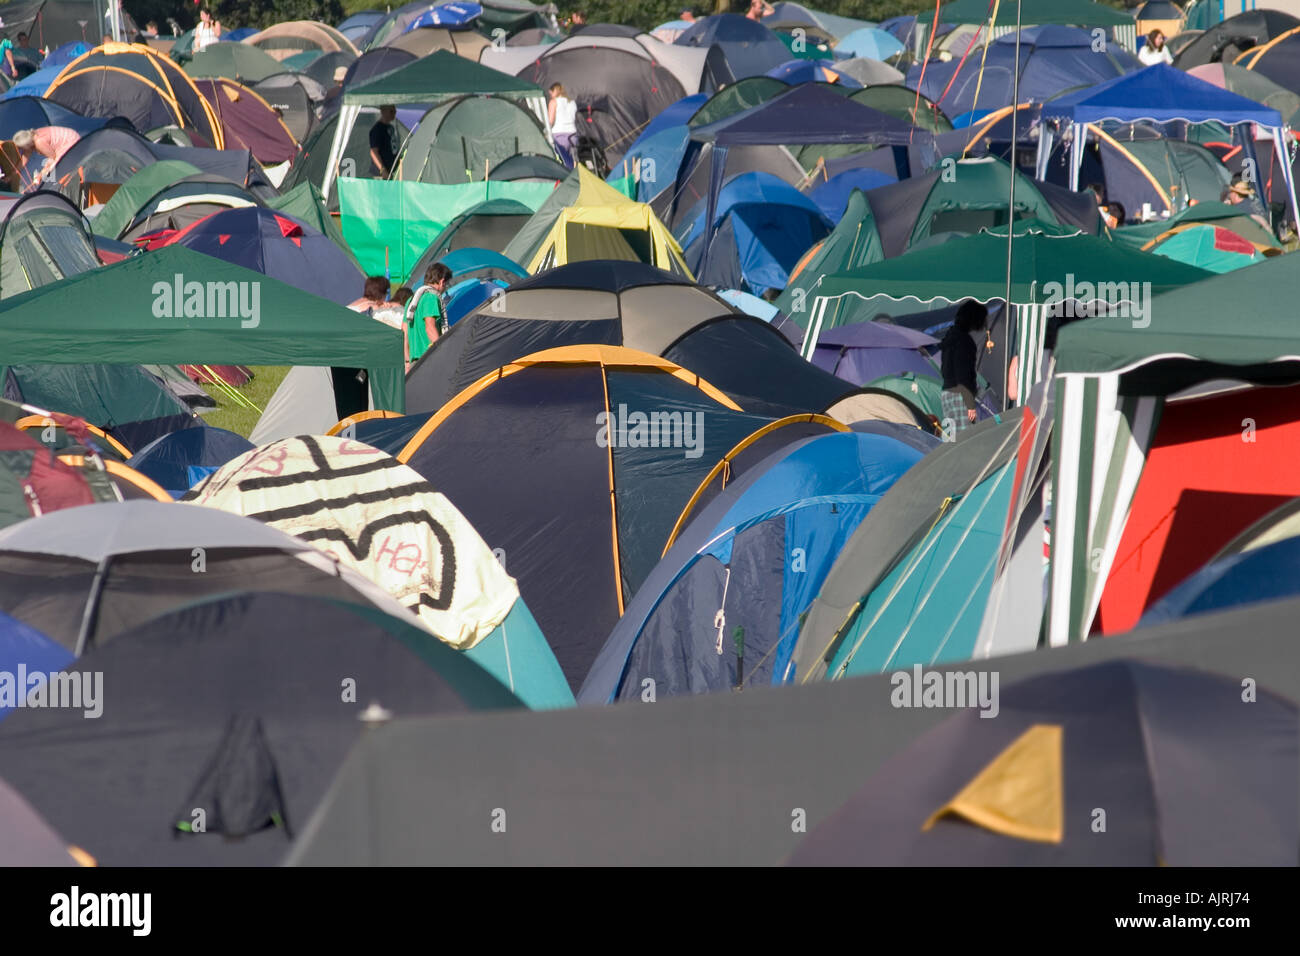 Mass of tents at crowded camp site for Guilfest rock music Festival. Guildford, England Stock Photo